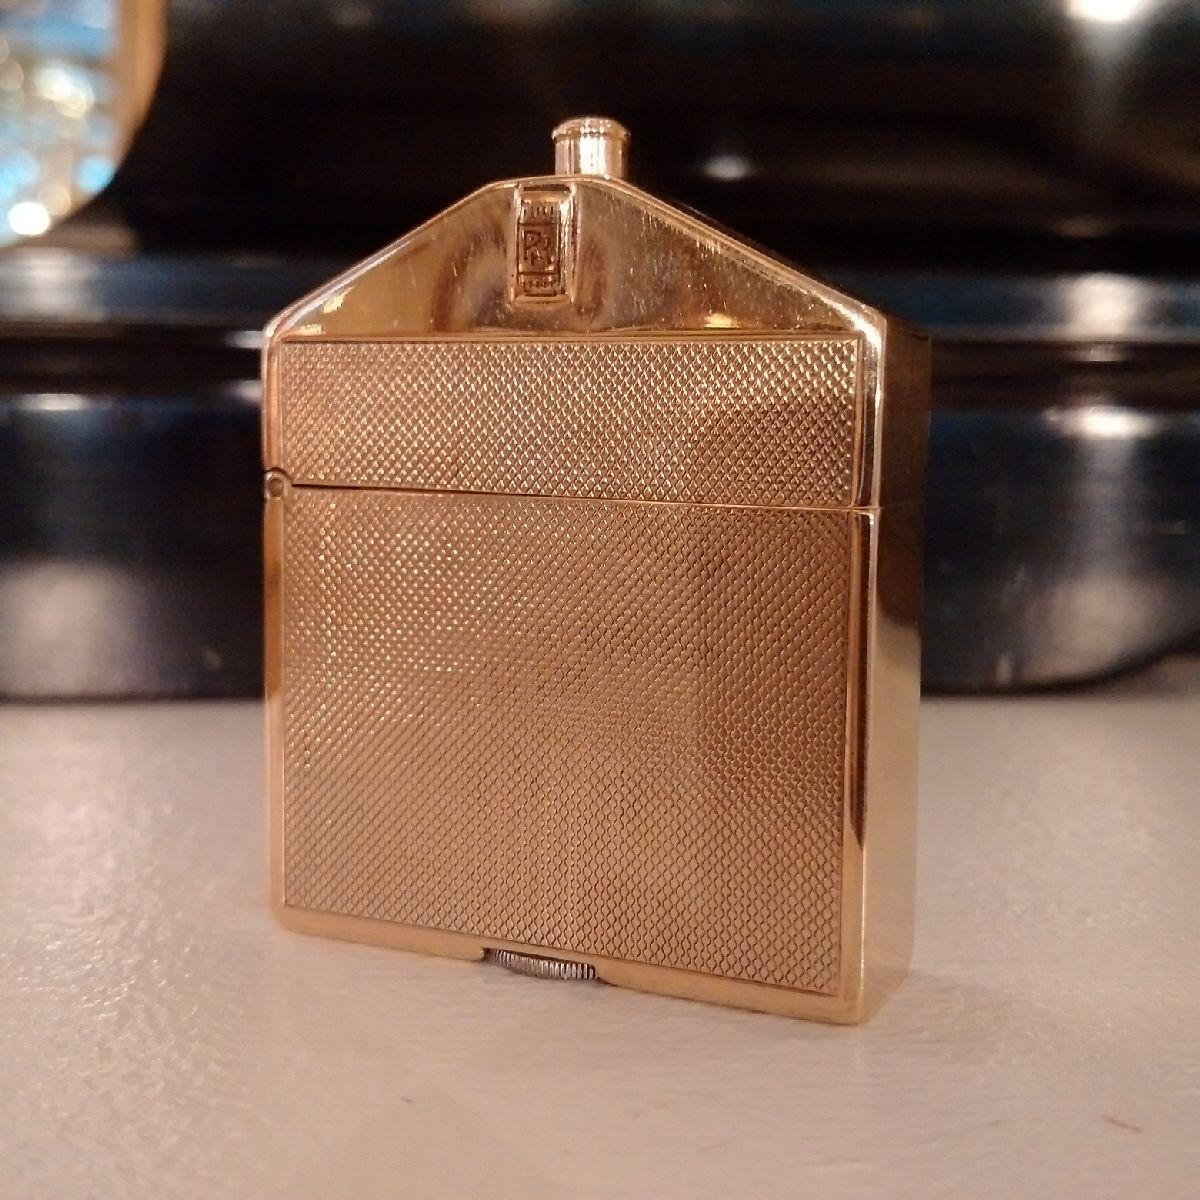 British 9-Carat Gold Rolls Royce Lighter by Alfred Dunhill, 1924